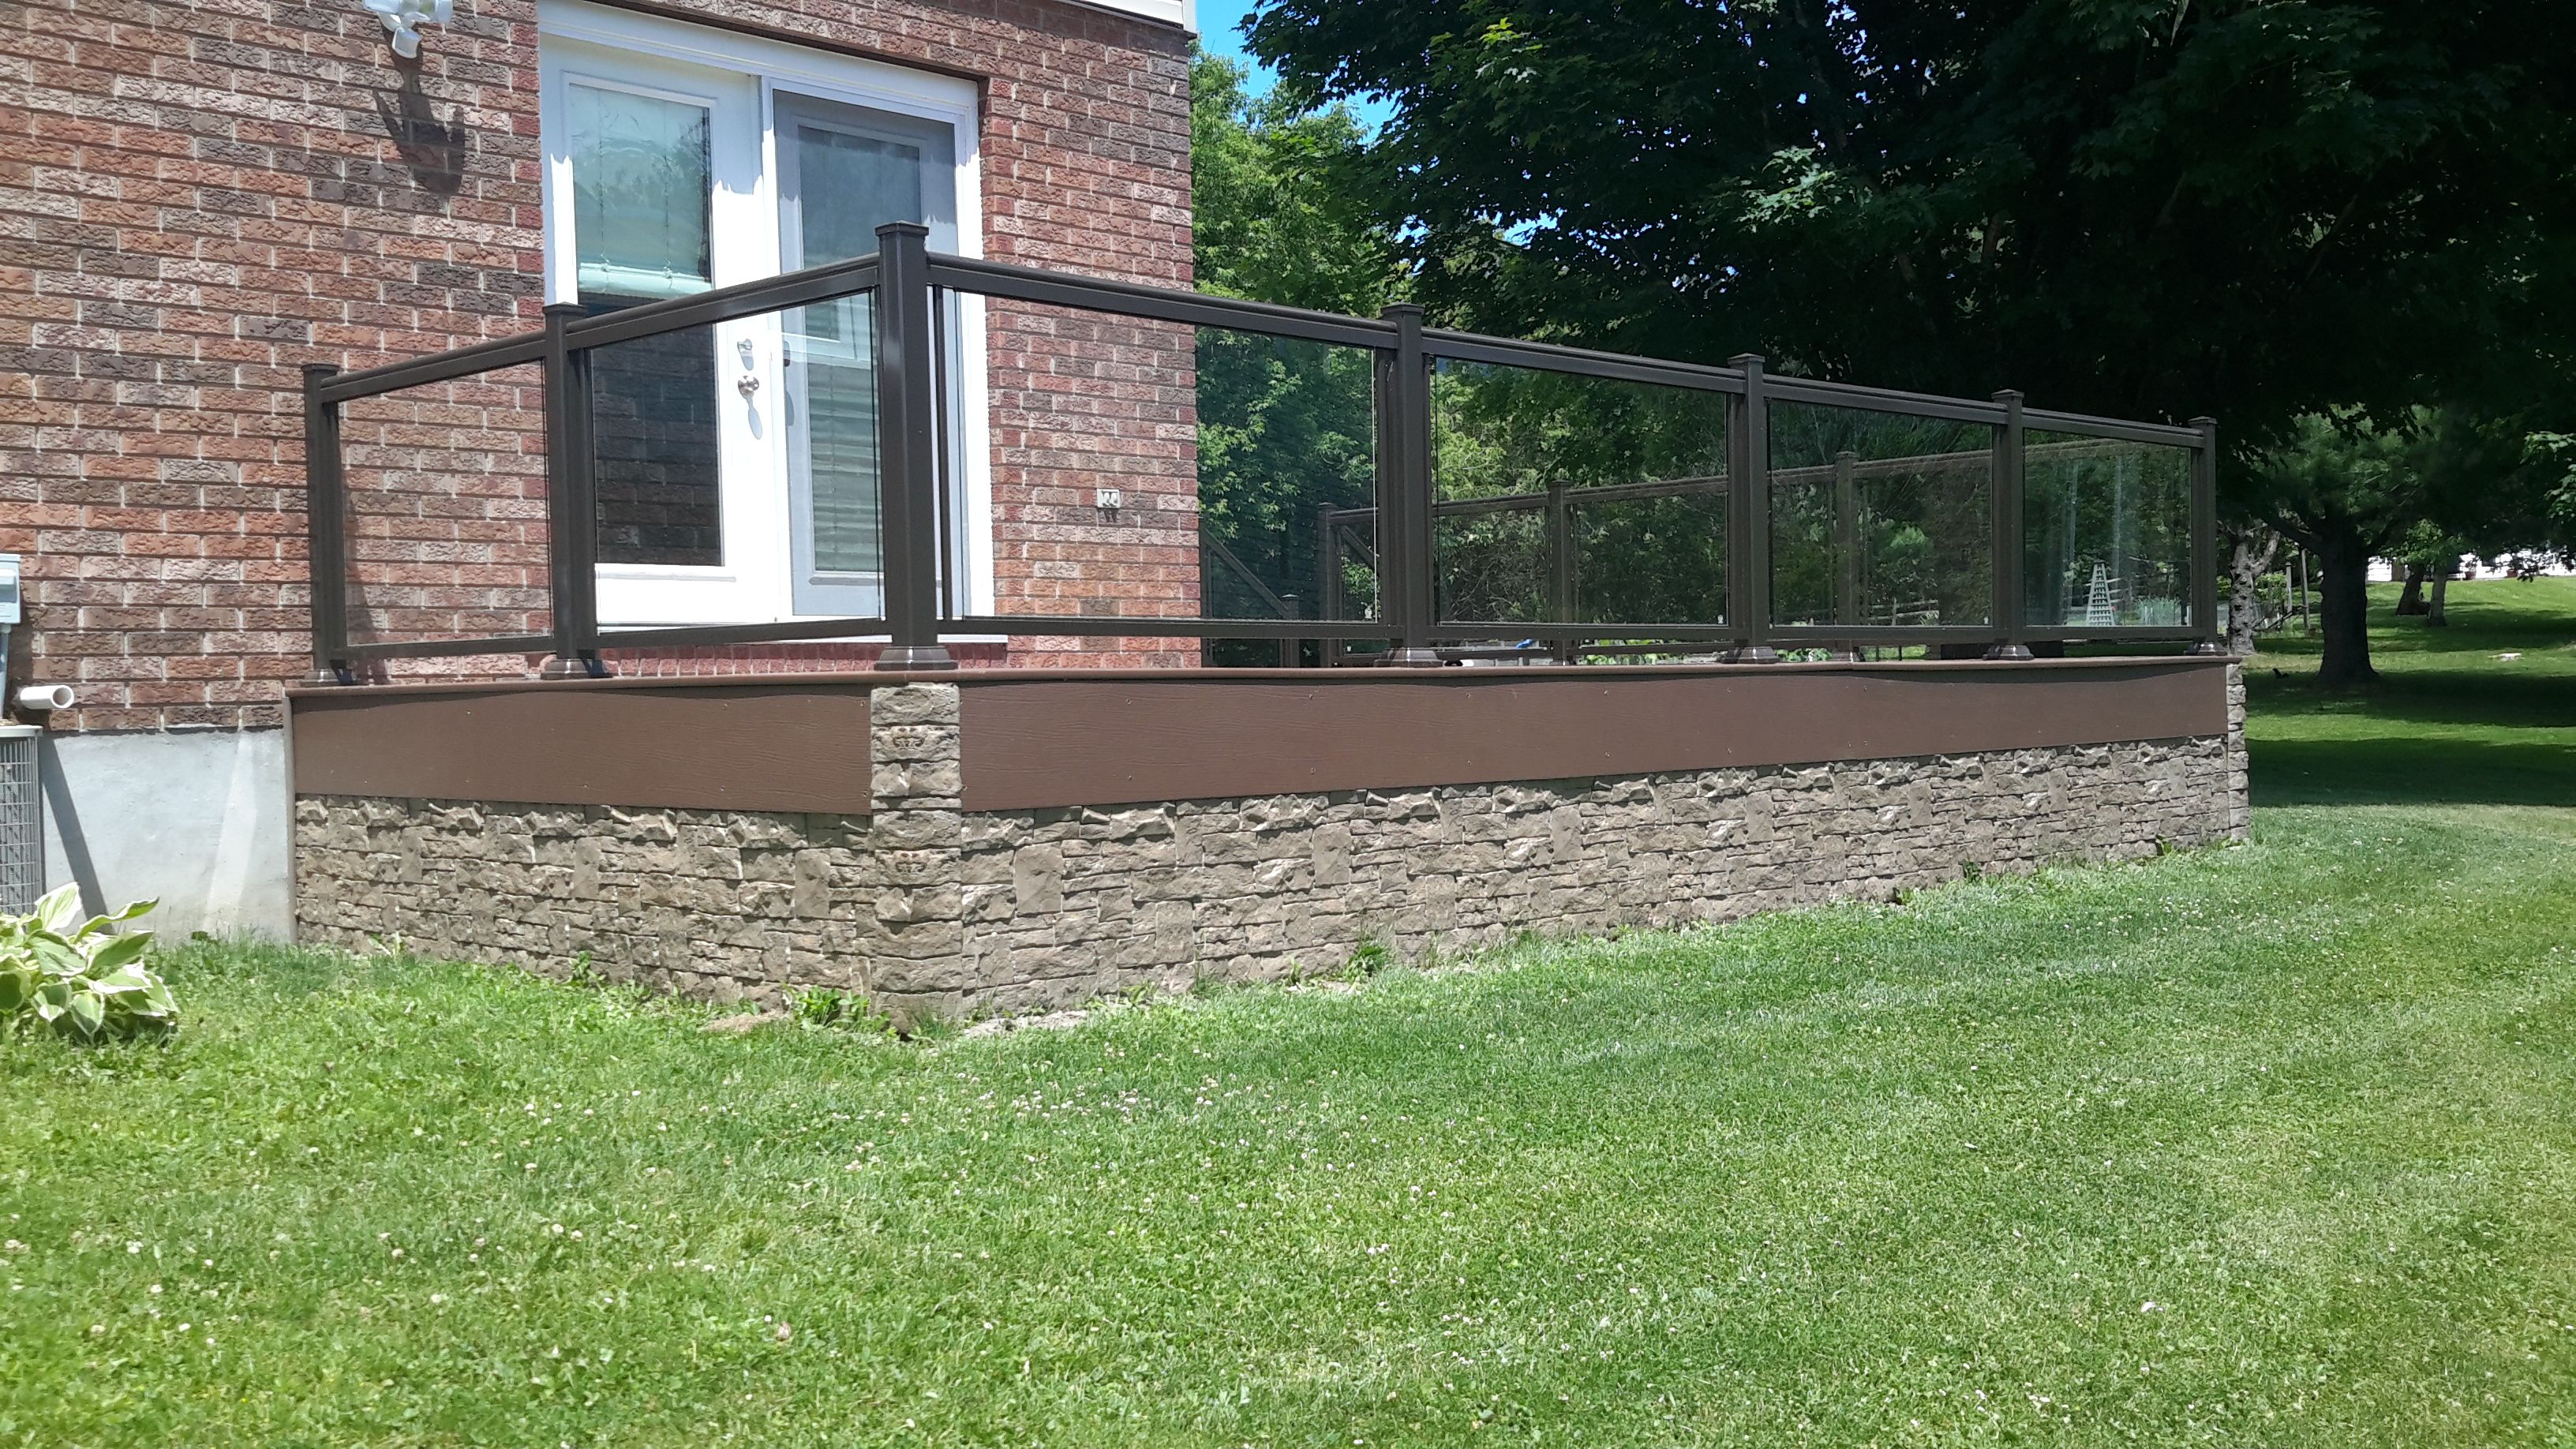 Rustic stone veneer for home foundations